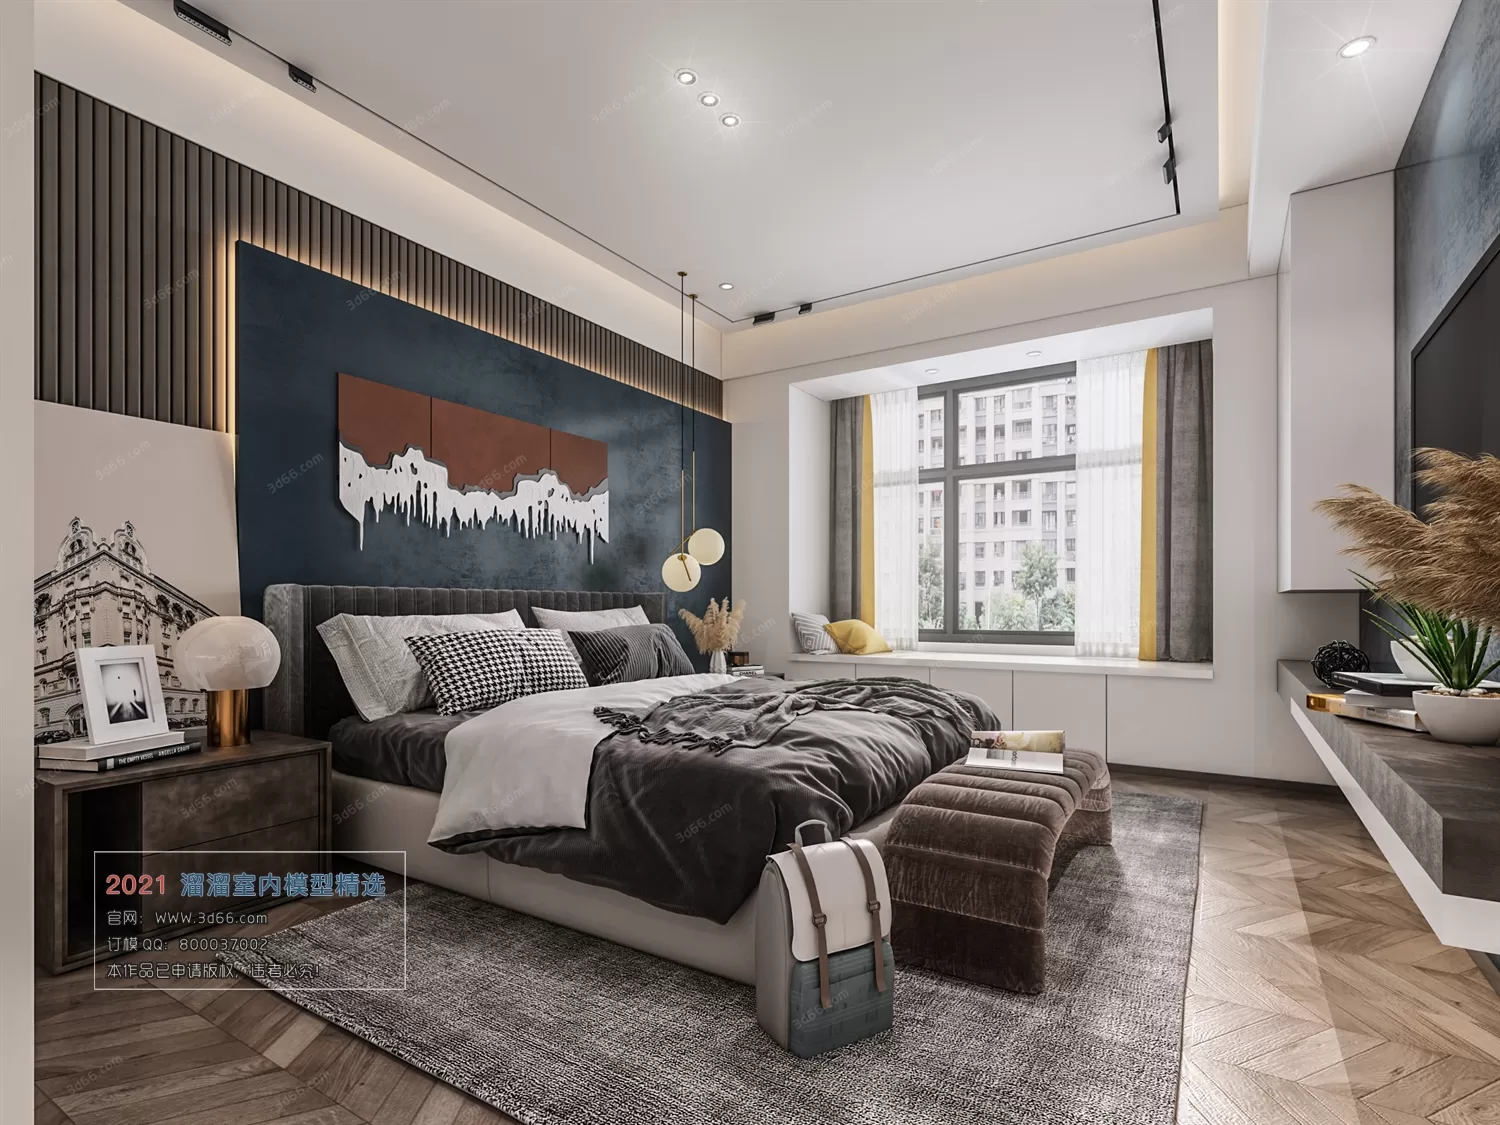 BEDROOM – A018-Modern style-Vray model